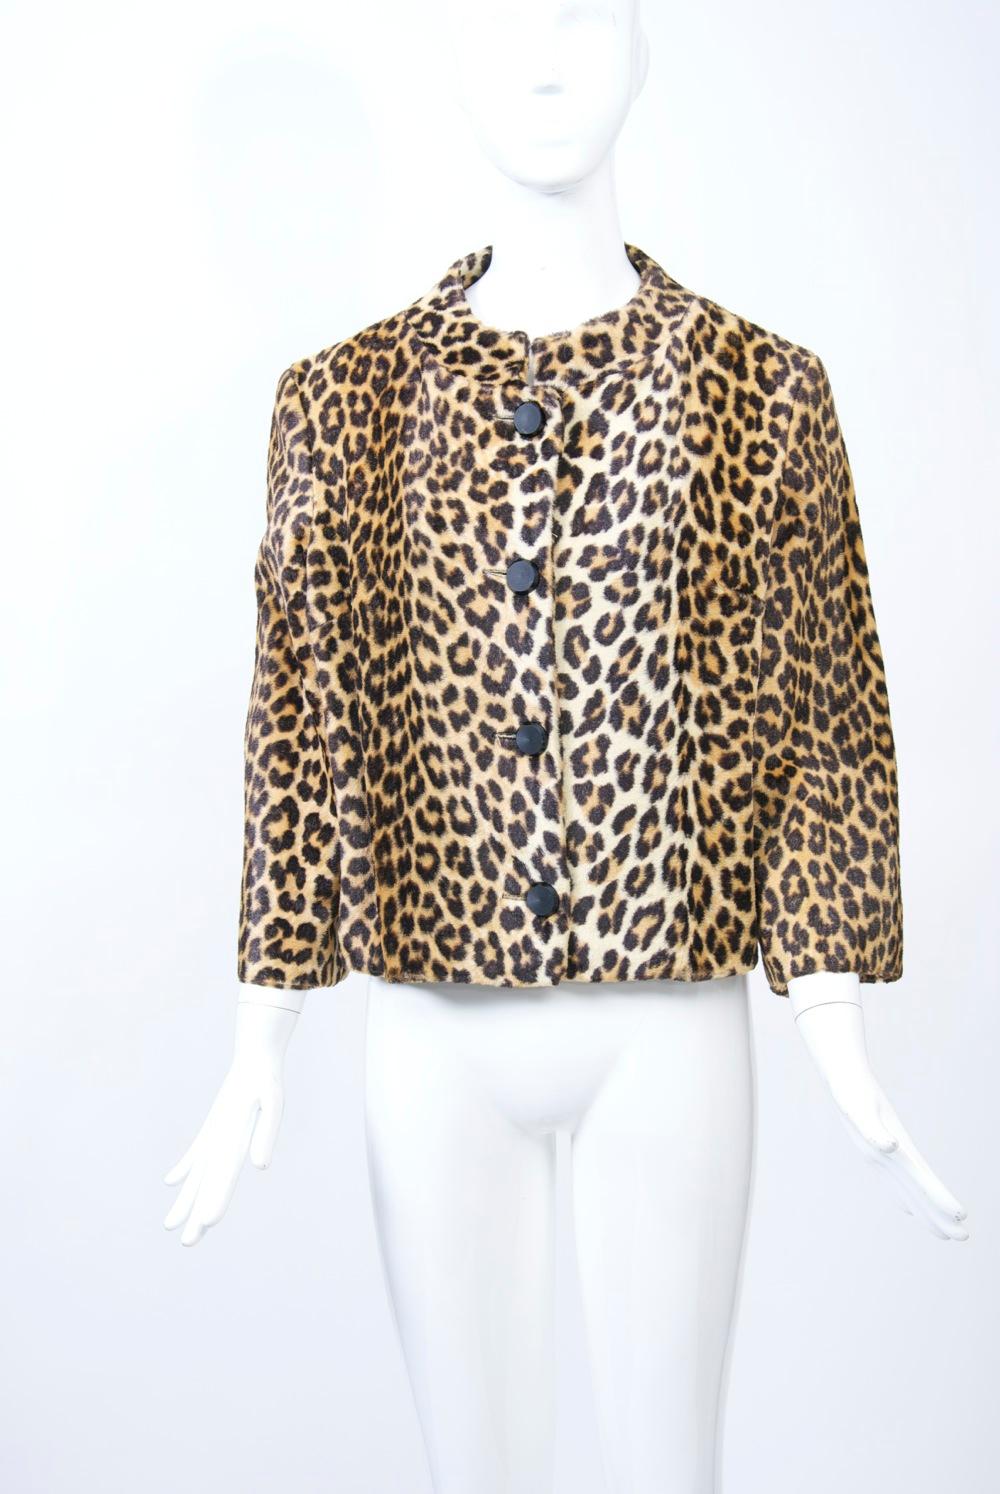 1960s cropped jacket in faux leopard skin features a low stand-up collar and above-the-wrist sleeves. Four black buttons close the single-breasted jacket. Black lining. Approximate size 6-8. Made for and retailed by New York department store